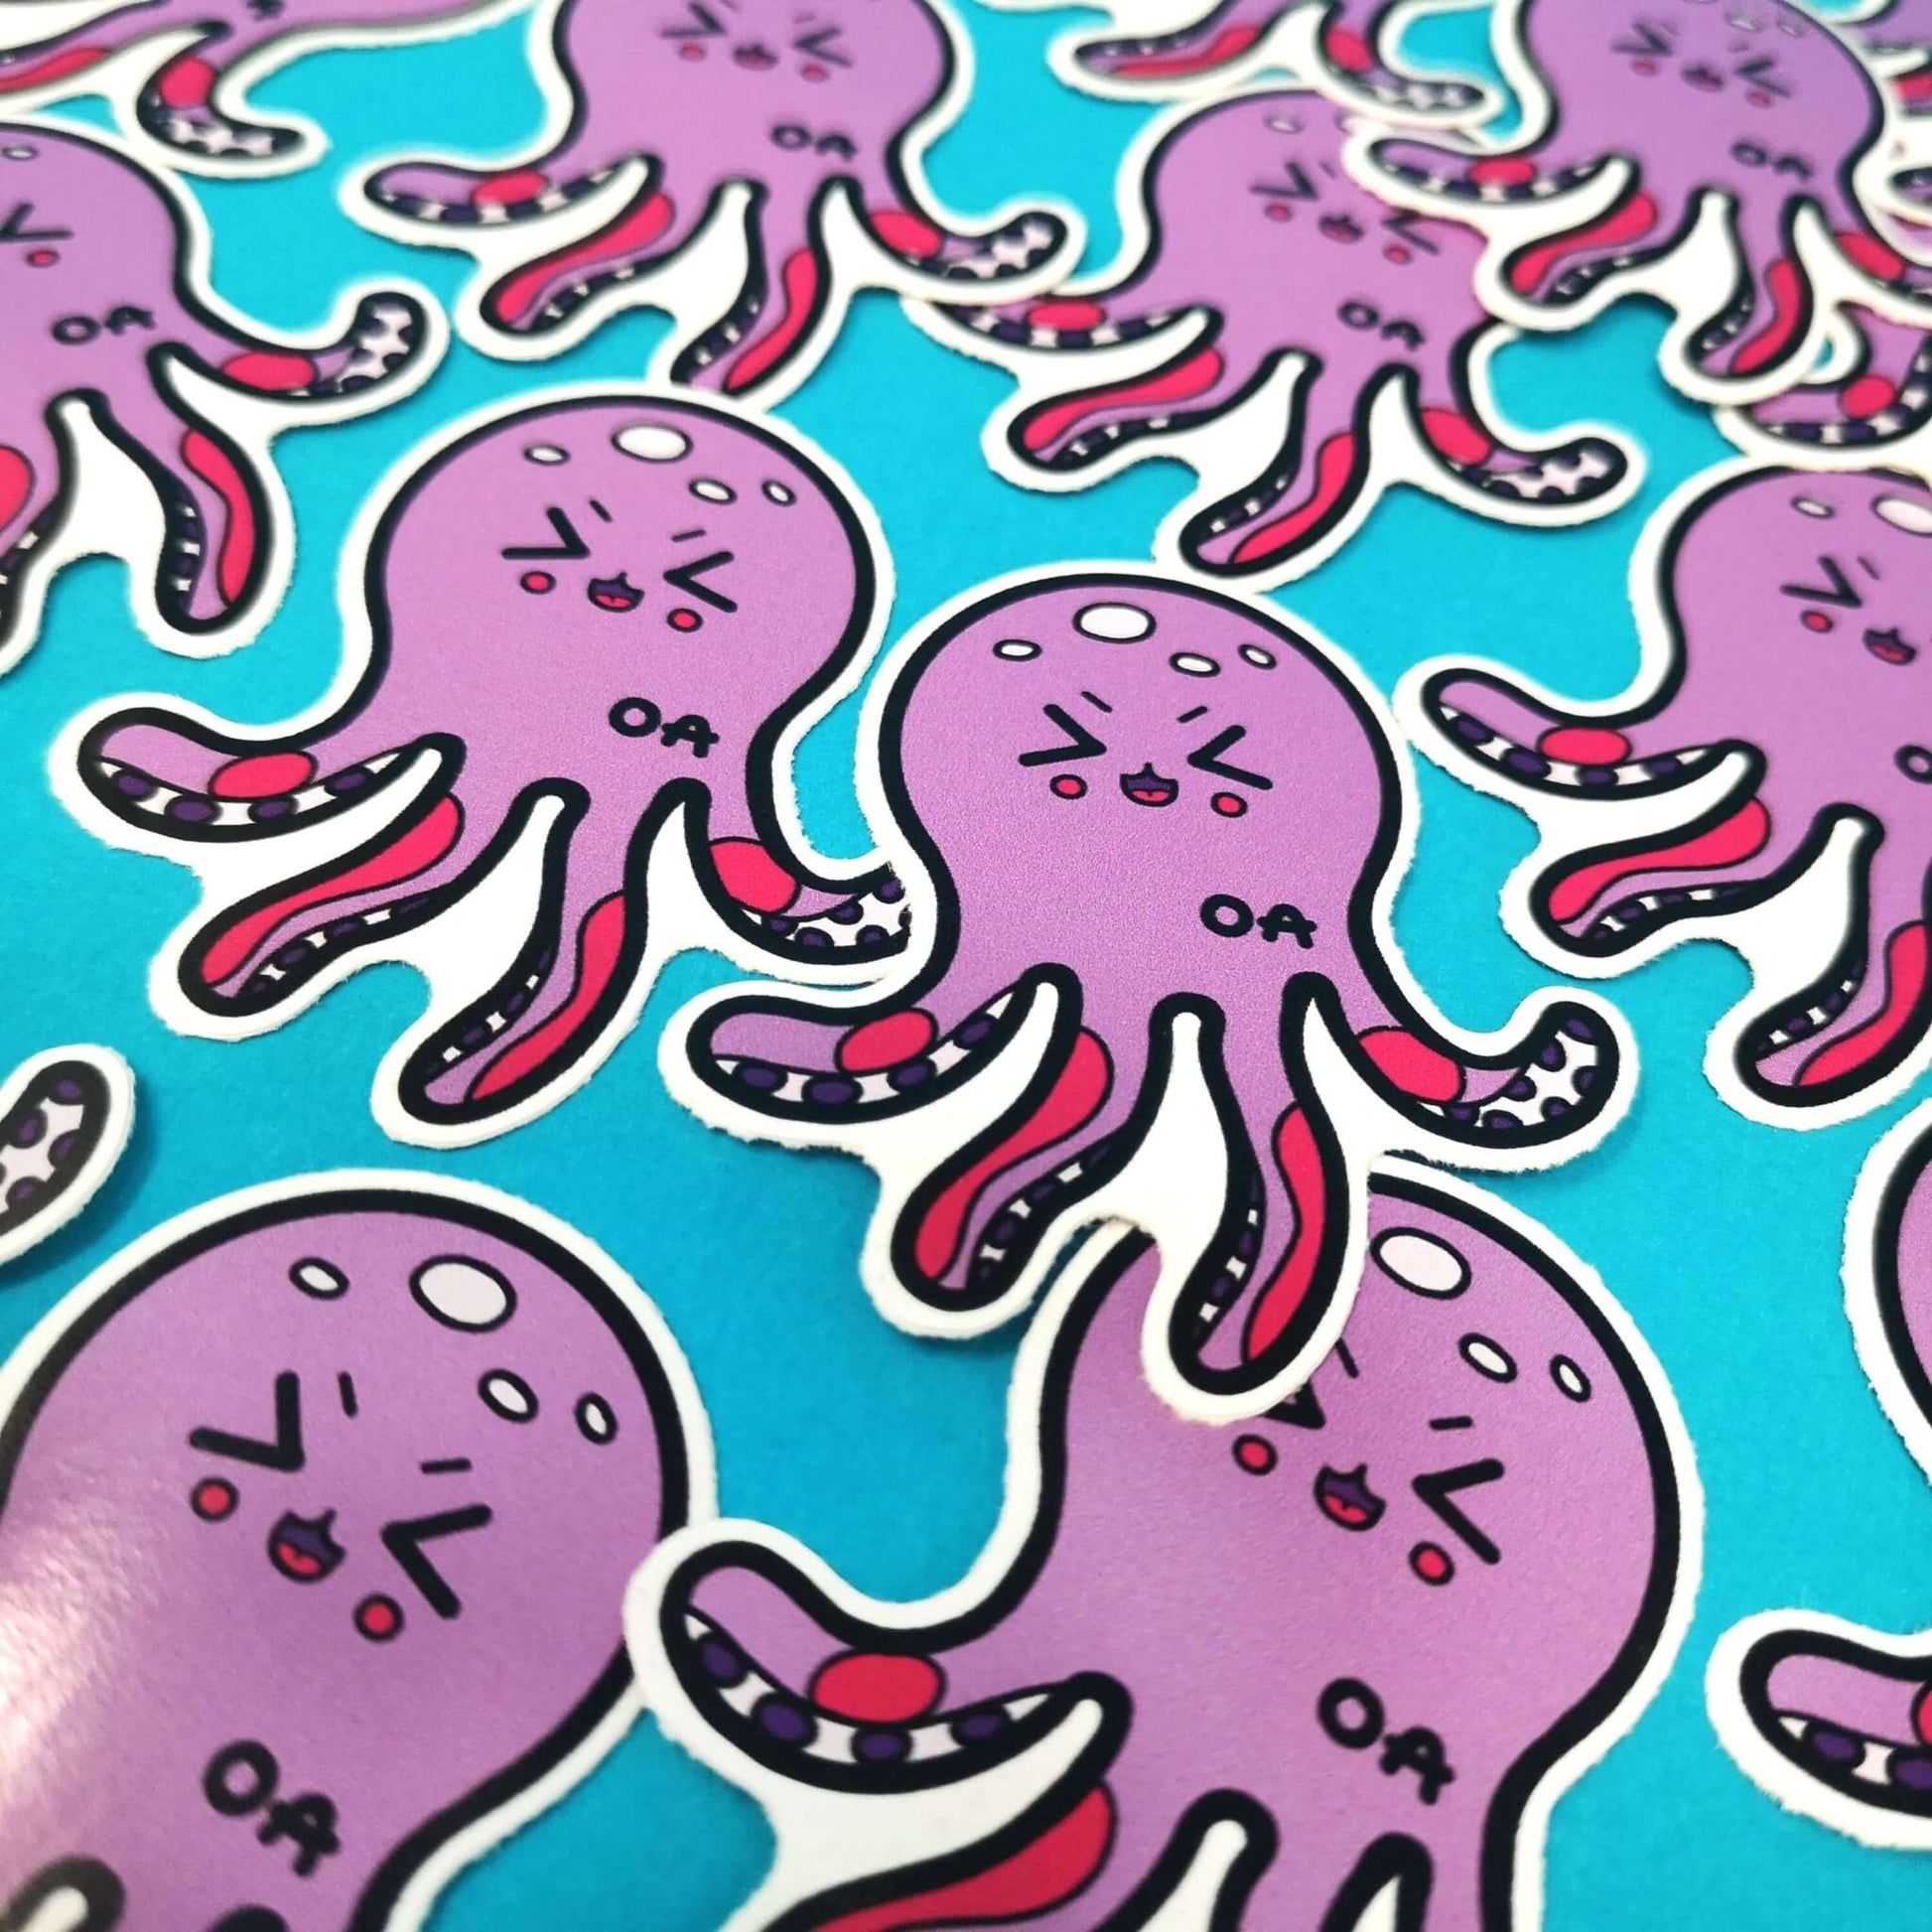 The Octeoarthritis Octopus Sticker - Osteoarthritis on a blue background with multiple copies of the same sticker. The purple smiling octopus has red patches all over its tentacles with the black intials 'OA' on its body. The hand drawn design is raising awareness for Osteoarthritis.